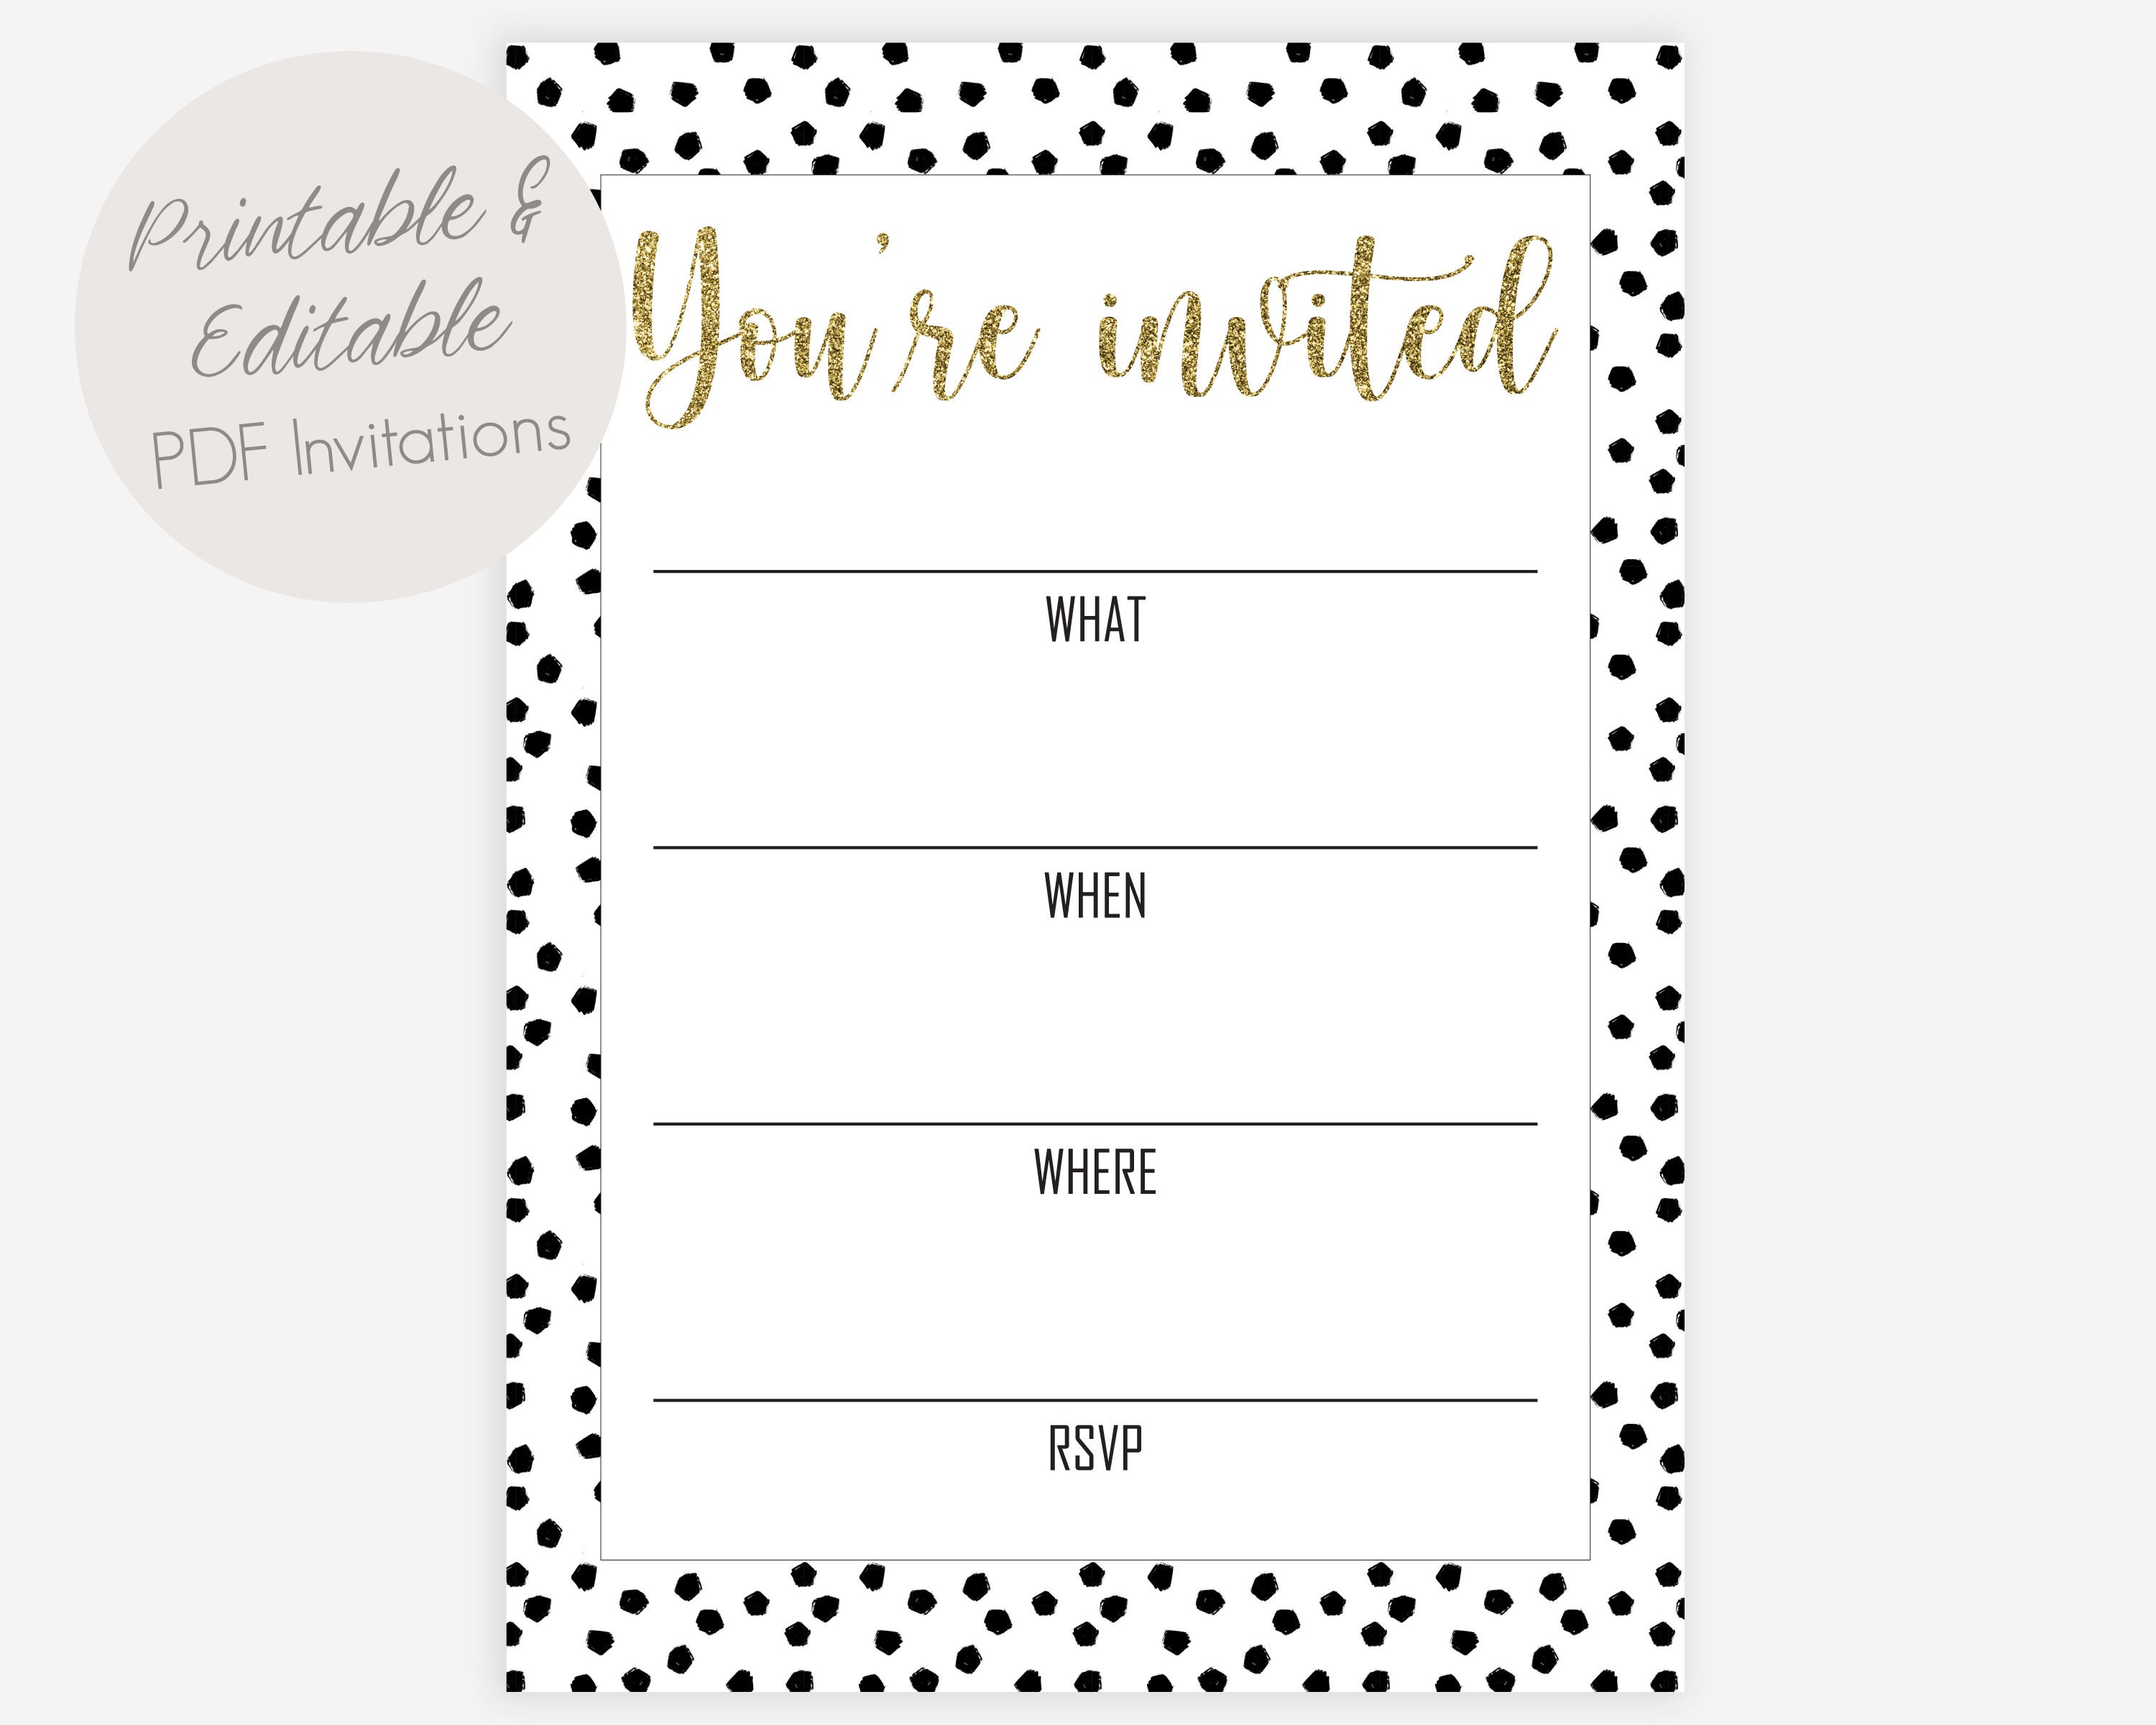 Fill-in-the-Blank Invitation Cards - Boxed set of 10